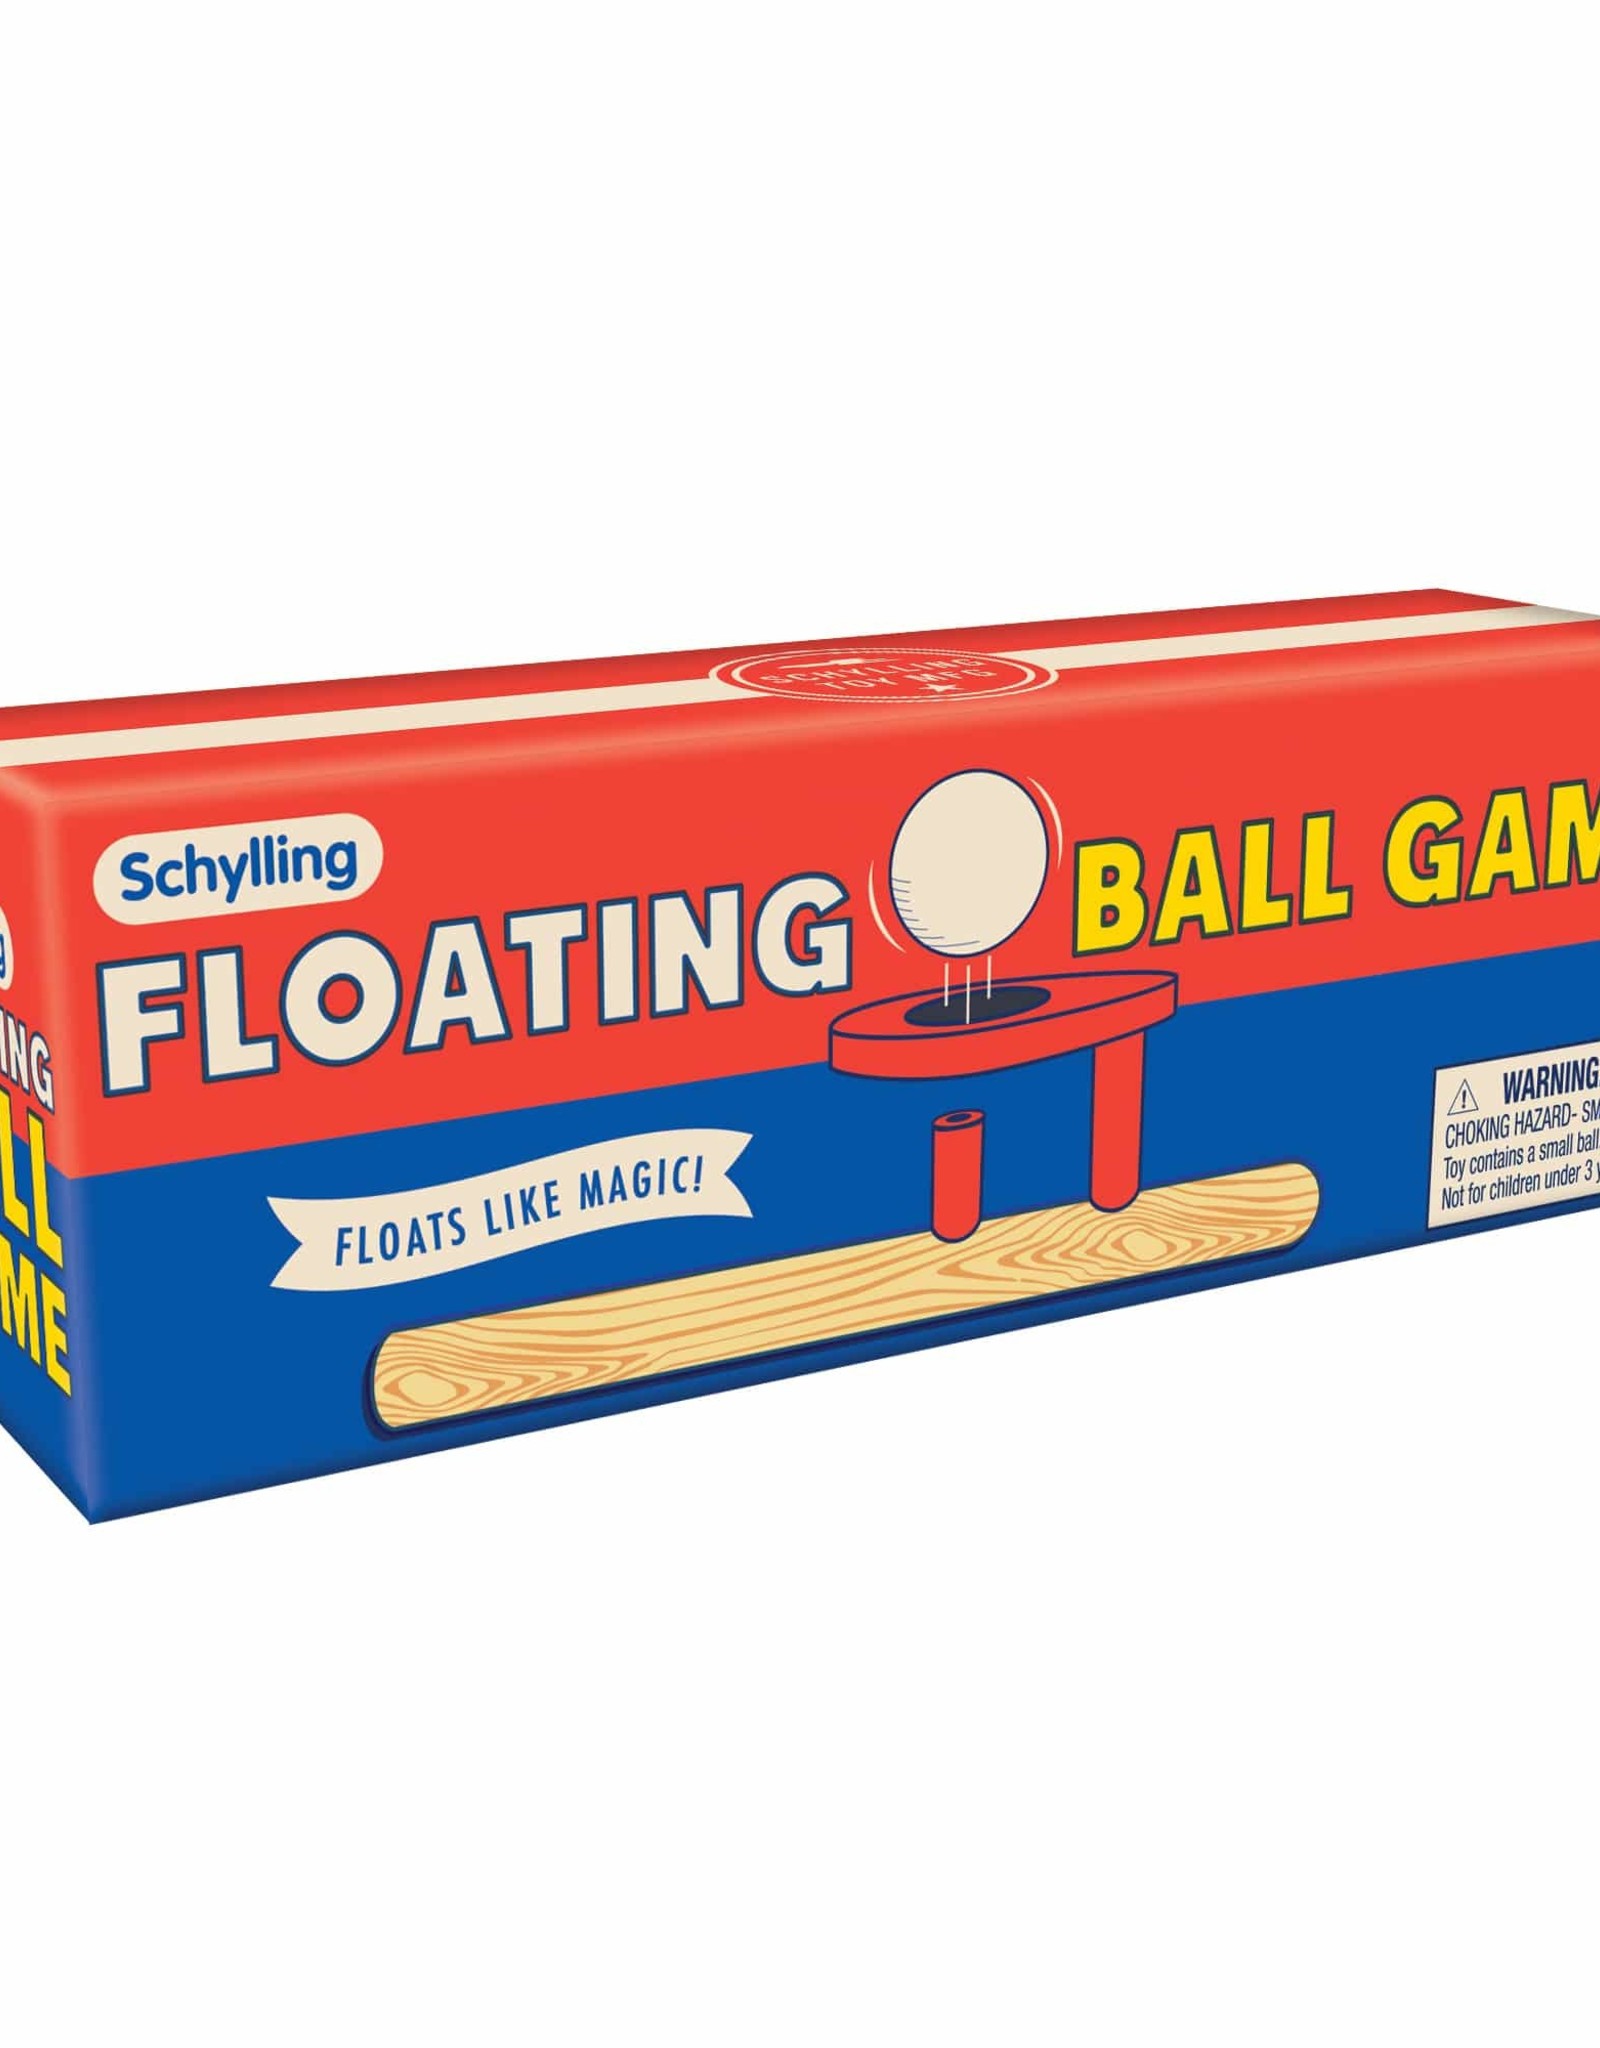 Schylling FLOATING BALL GAME